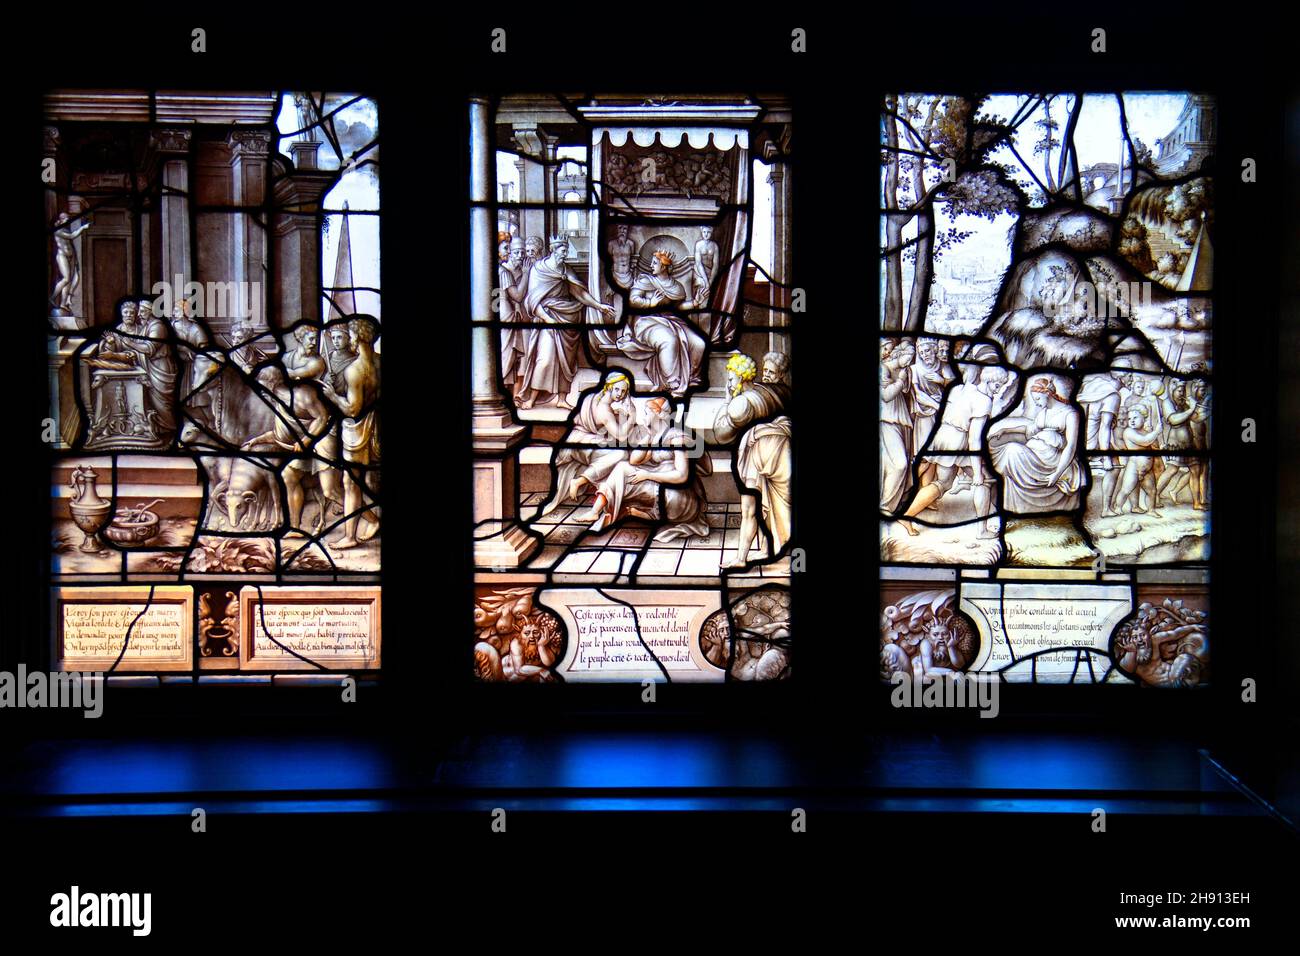 The Psyche Gallery stained glass window, chateau de Chantilly, Condée museum, Picardy, Oise, France. Stock Photo